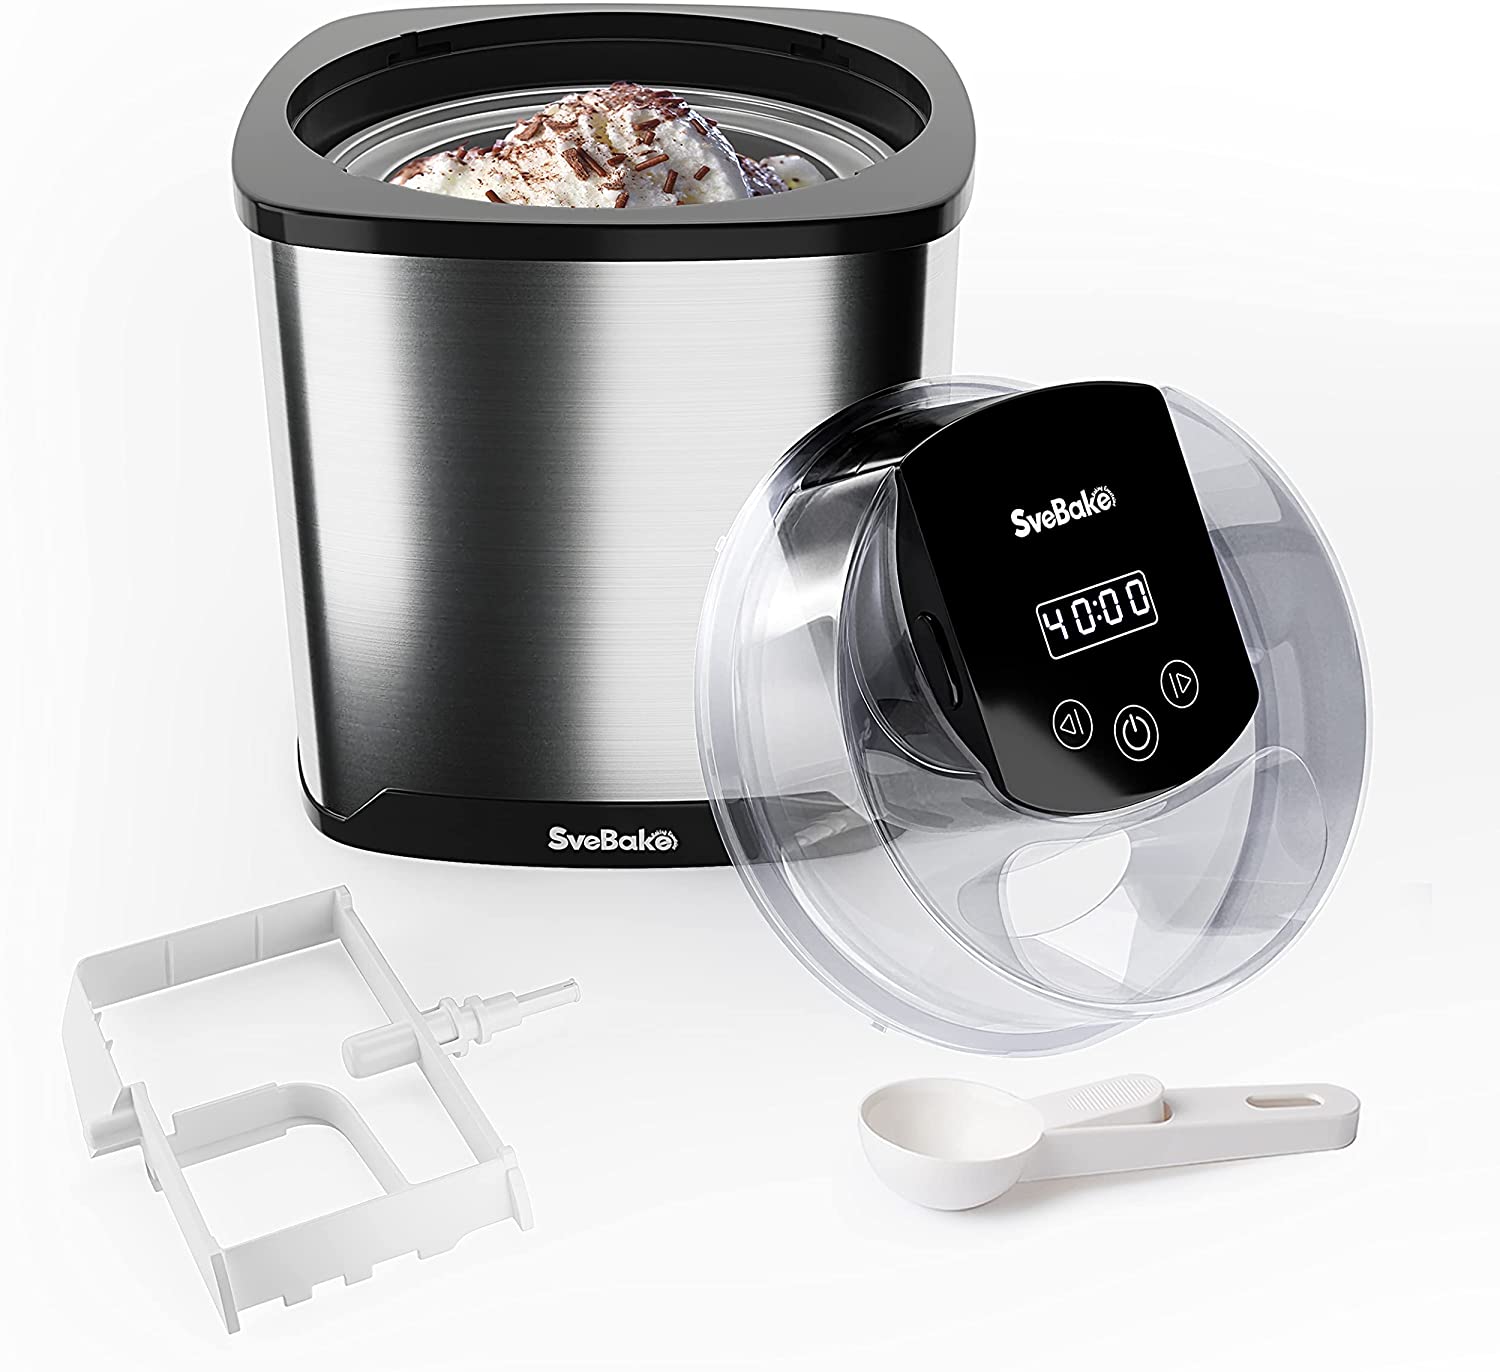 SveBake Ice Cream Maker with 2 Litre Freezer Container and Stainless Steel Chassis - Digital LED Timer & Lid Opening, Ice Cream Maker for Frozen Yogurt, Sorbet and Ice Cream, Incl. Recipes (English language version not guaranteed).